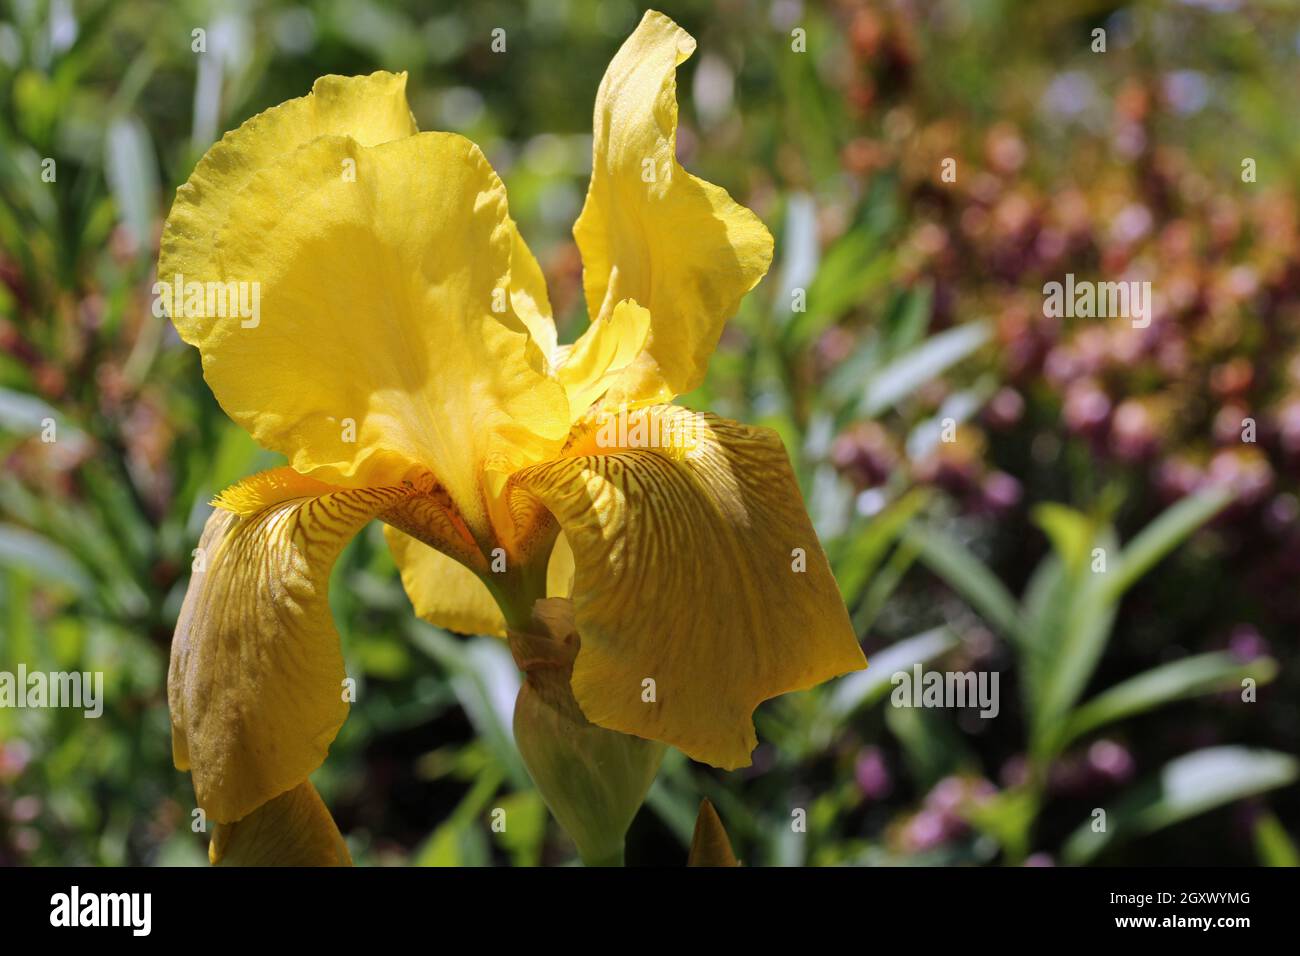 Bearded yellow iris flower with brown markings in close up and a blurred background of plants. Stock Photo